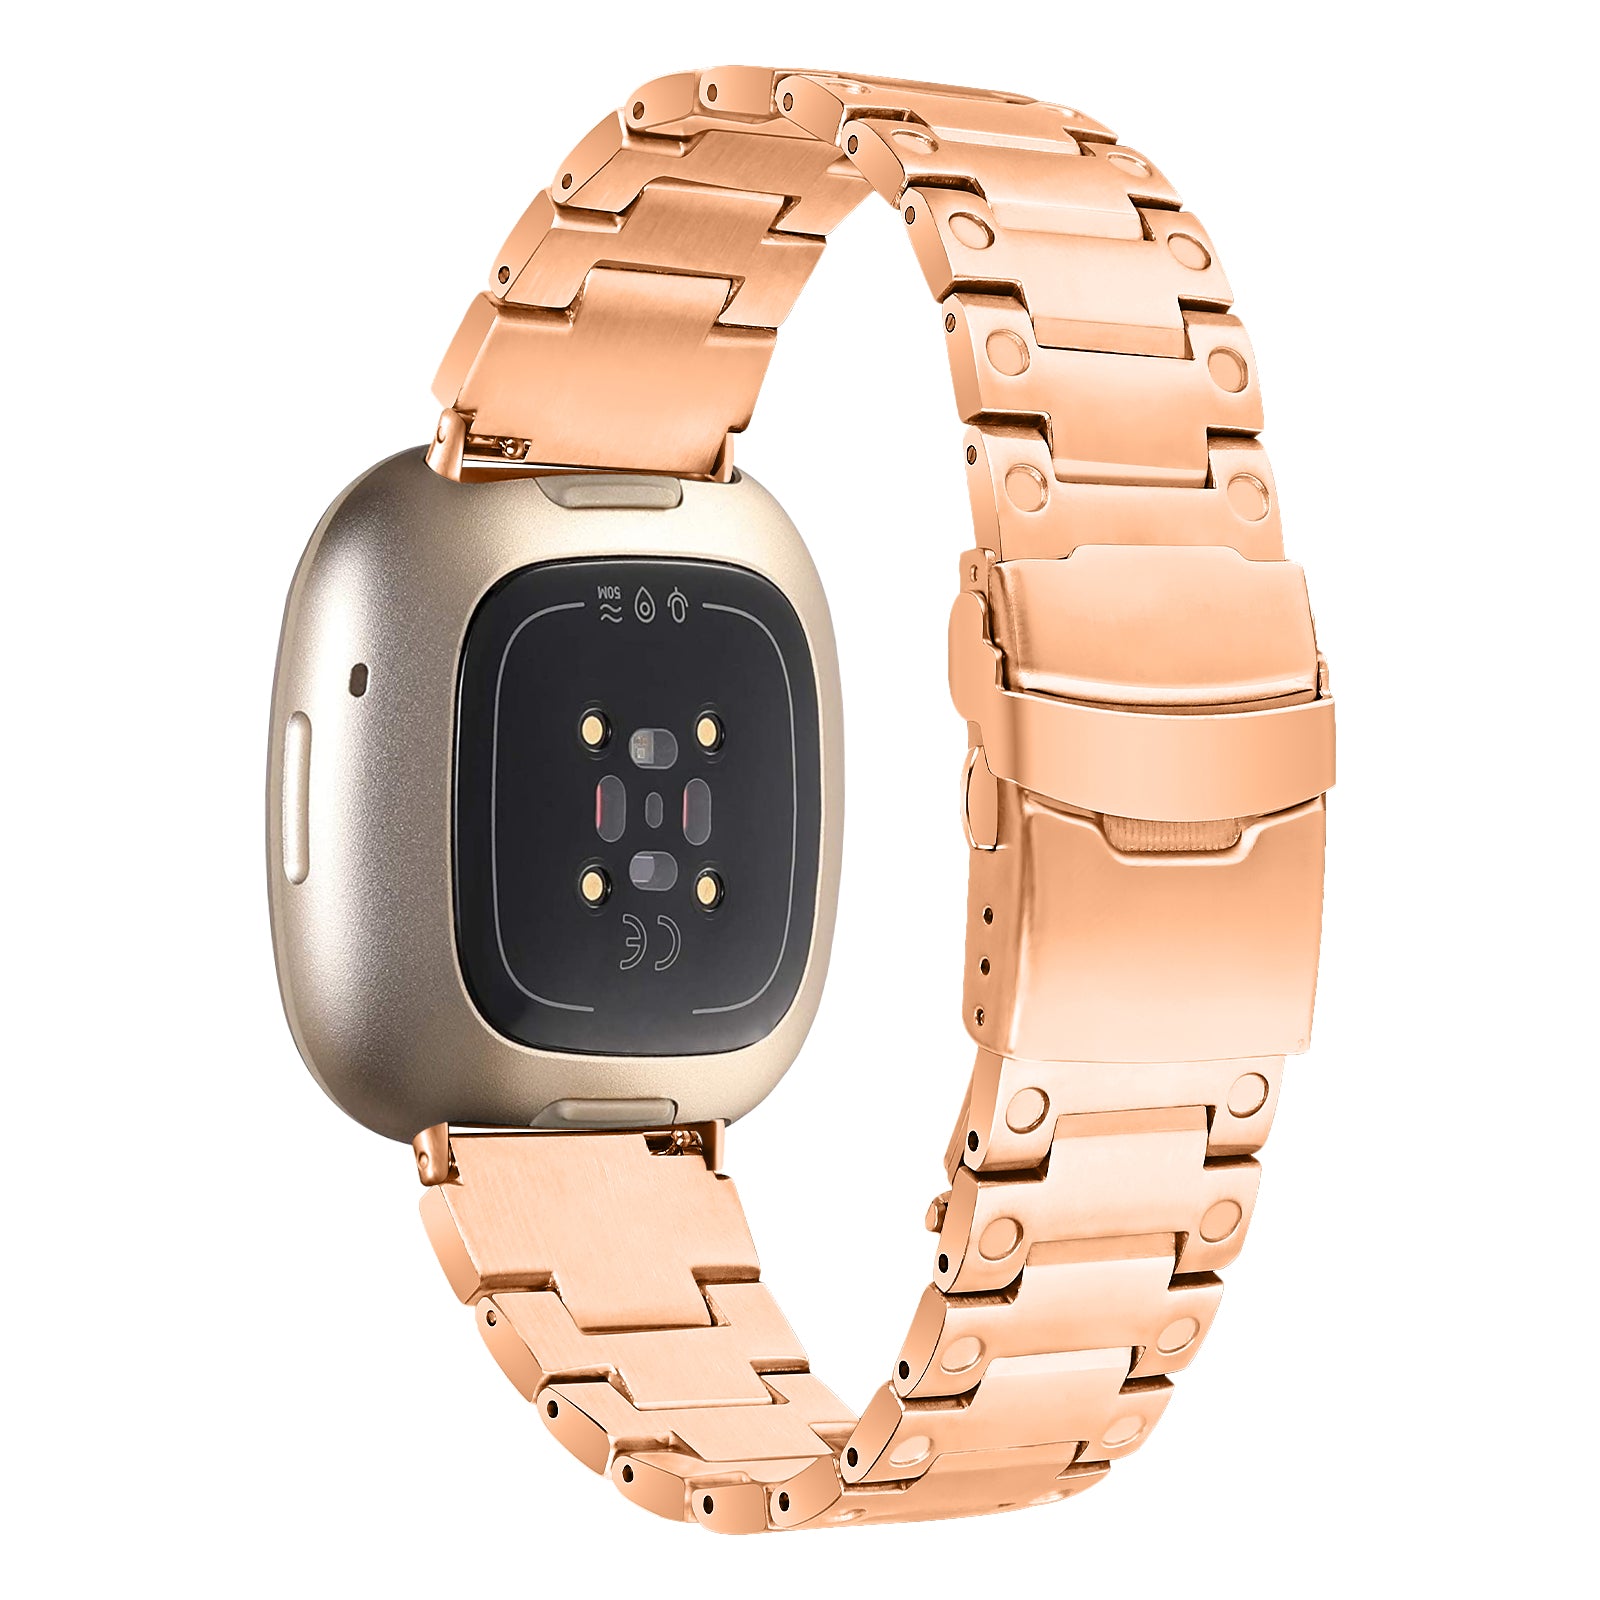 For Fitbit Versa 3 / Sense Watch Strap Three Bead Stainless Steel Wrist Band Replacement - Rose Gold